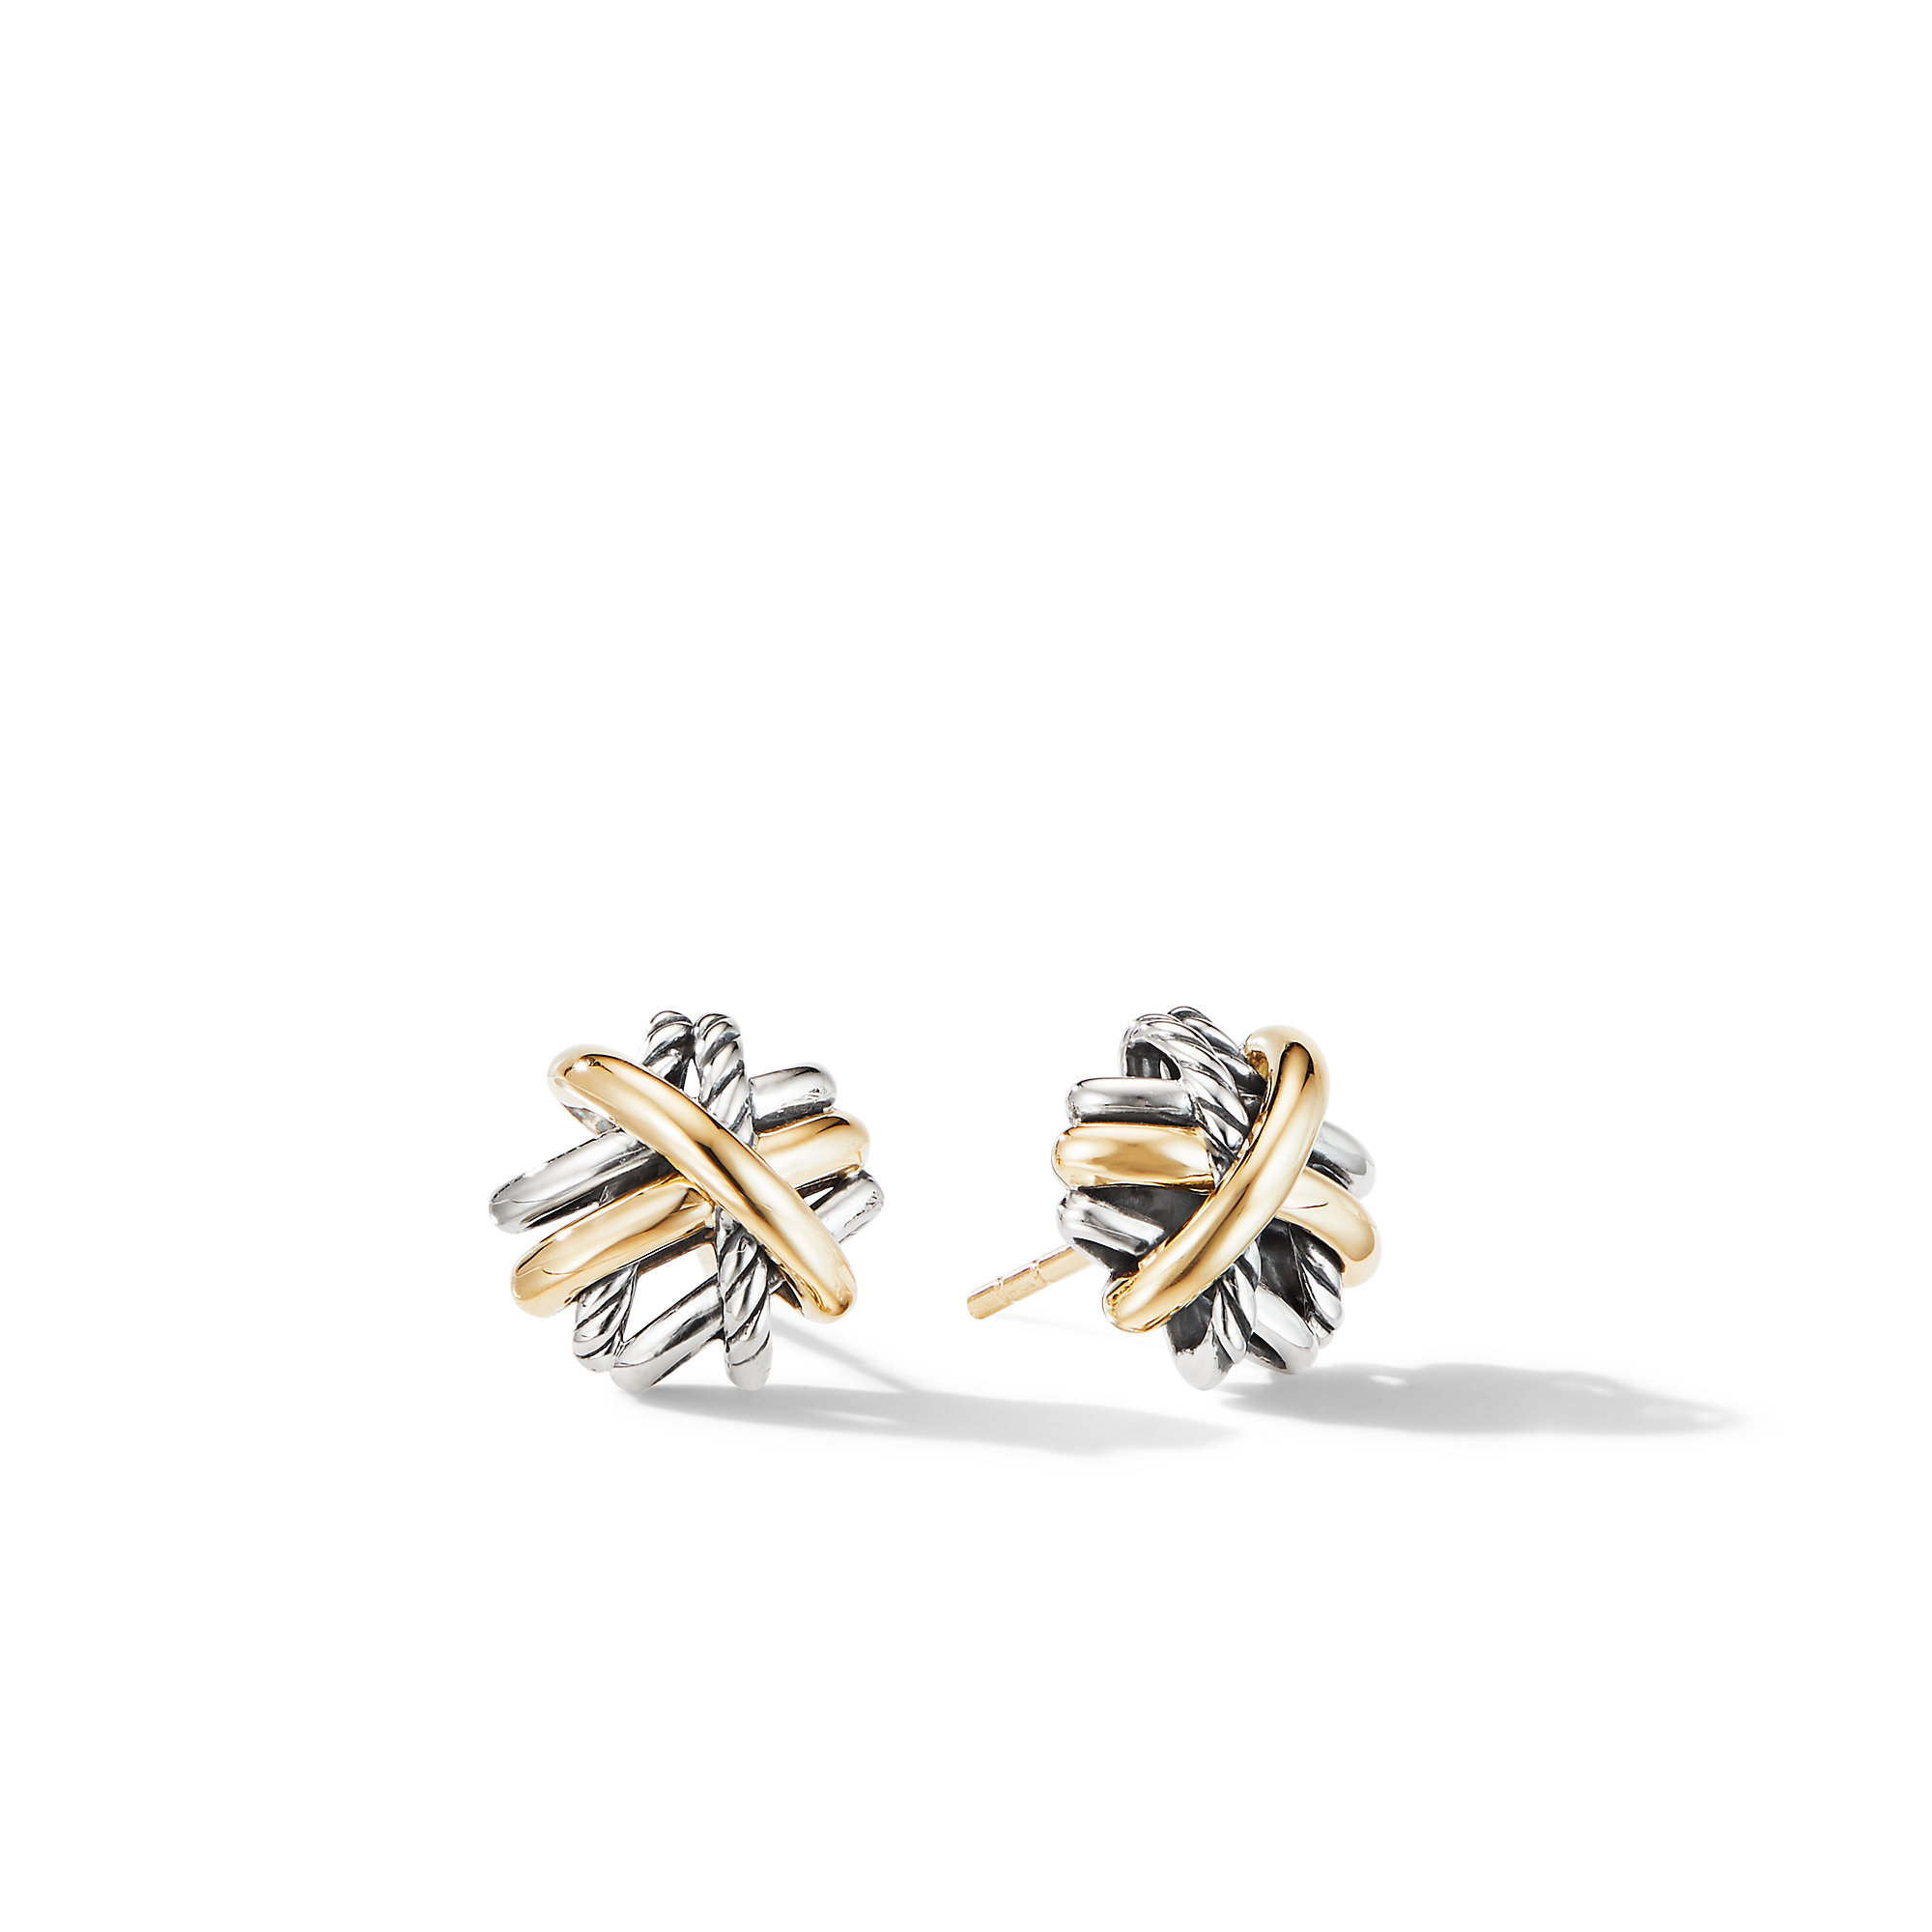 Crossover Stud Earrings in Sterling Silver with 18K Yellow Gold